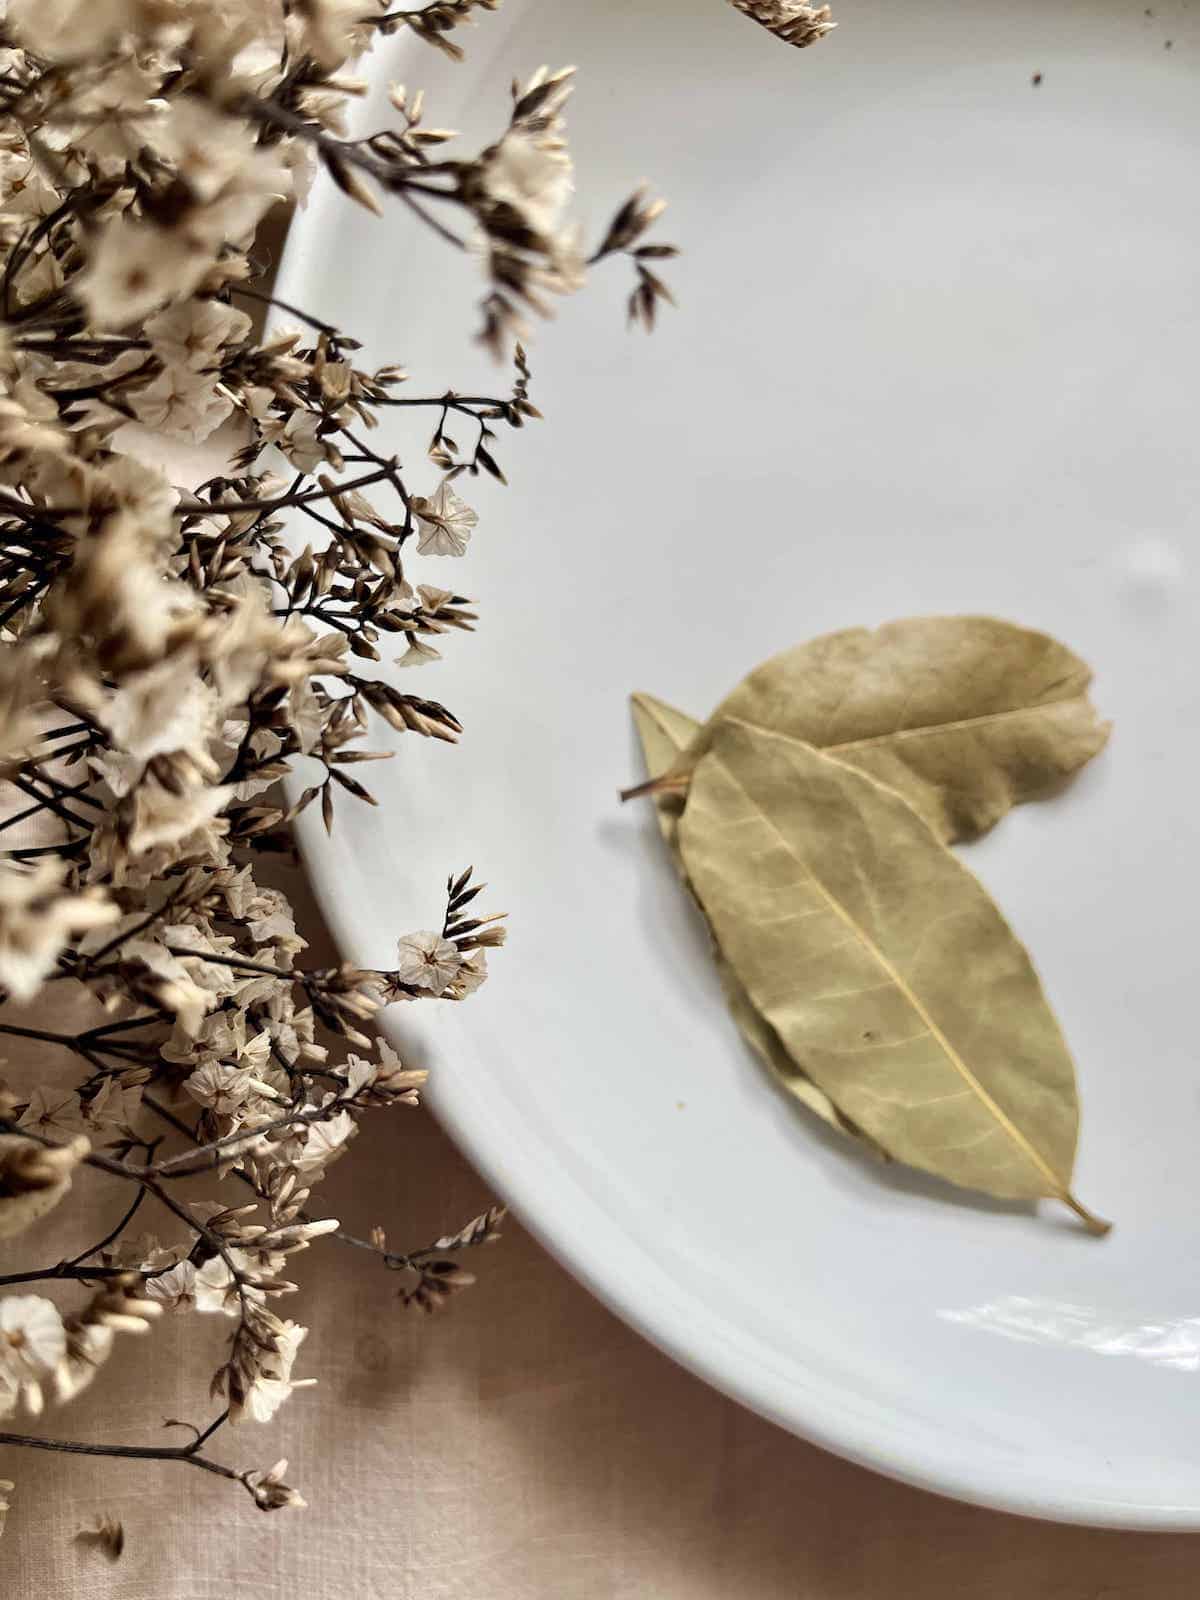 2 dried bay leaves on a white plate.